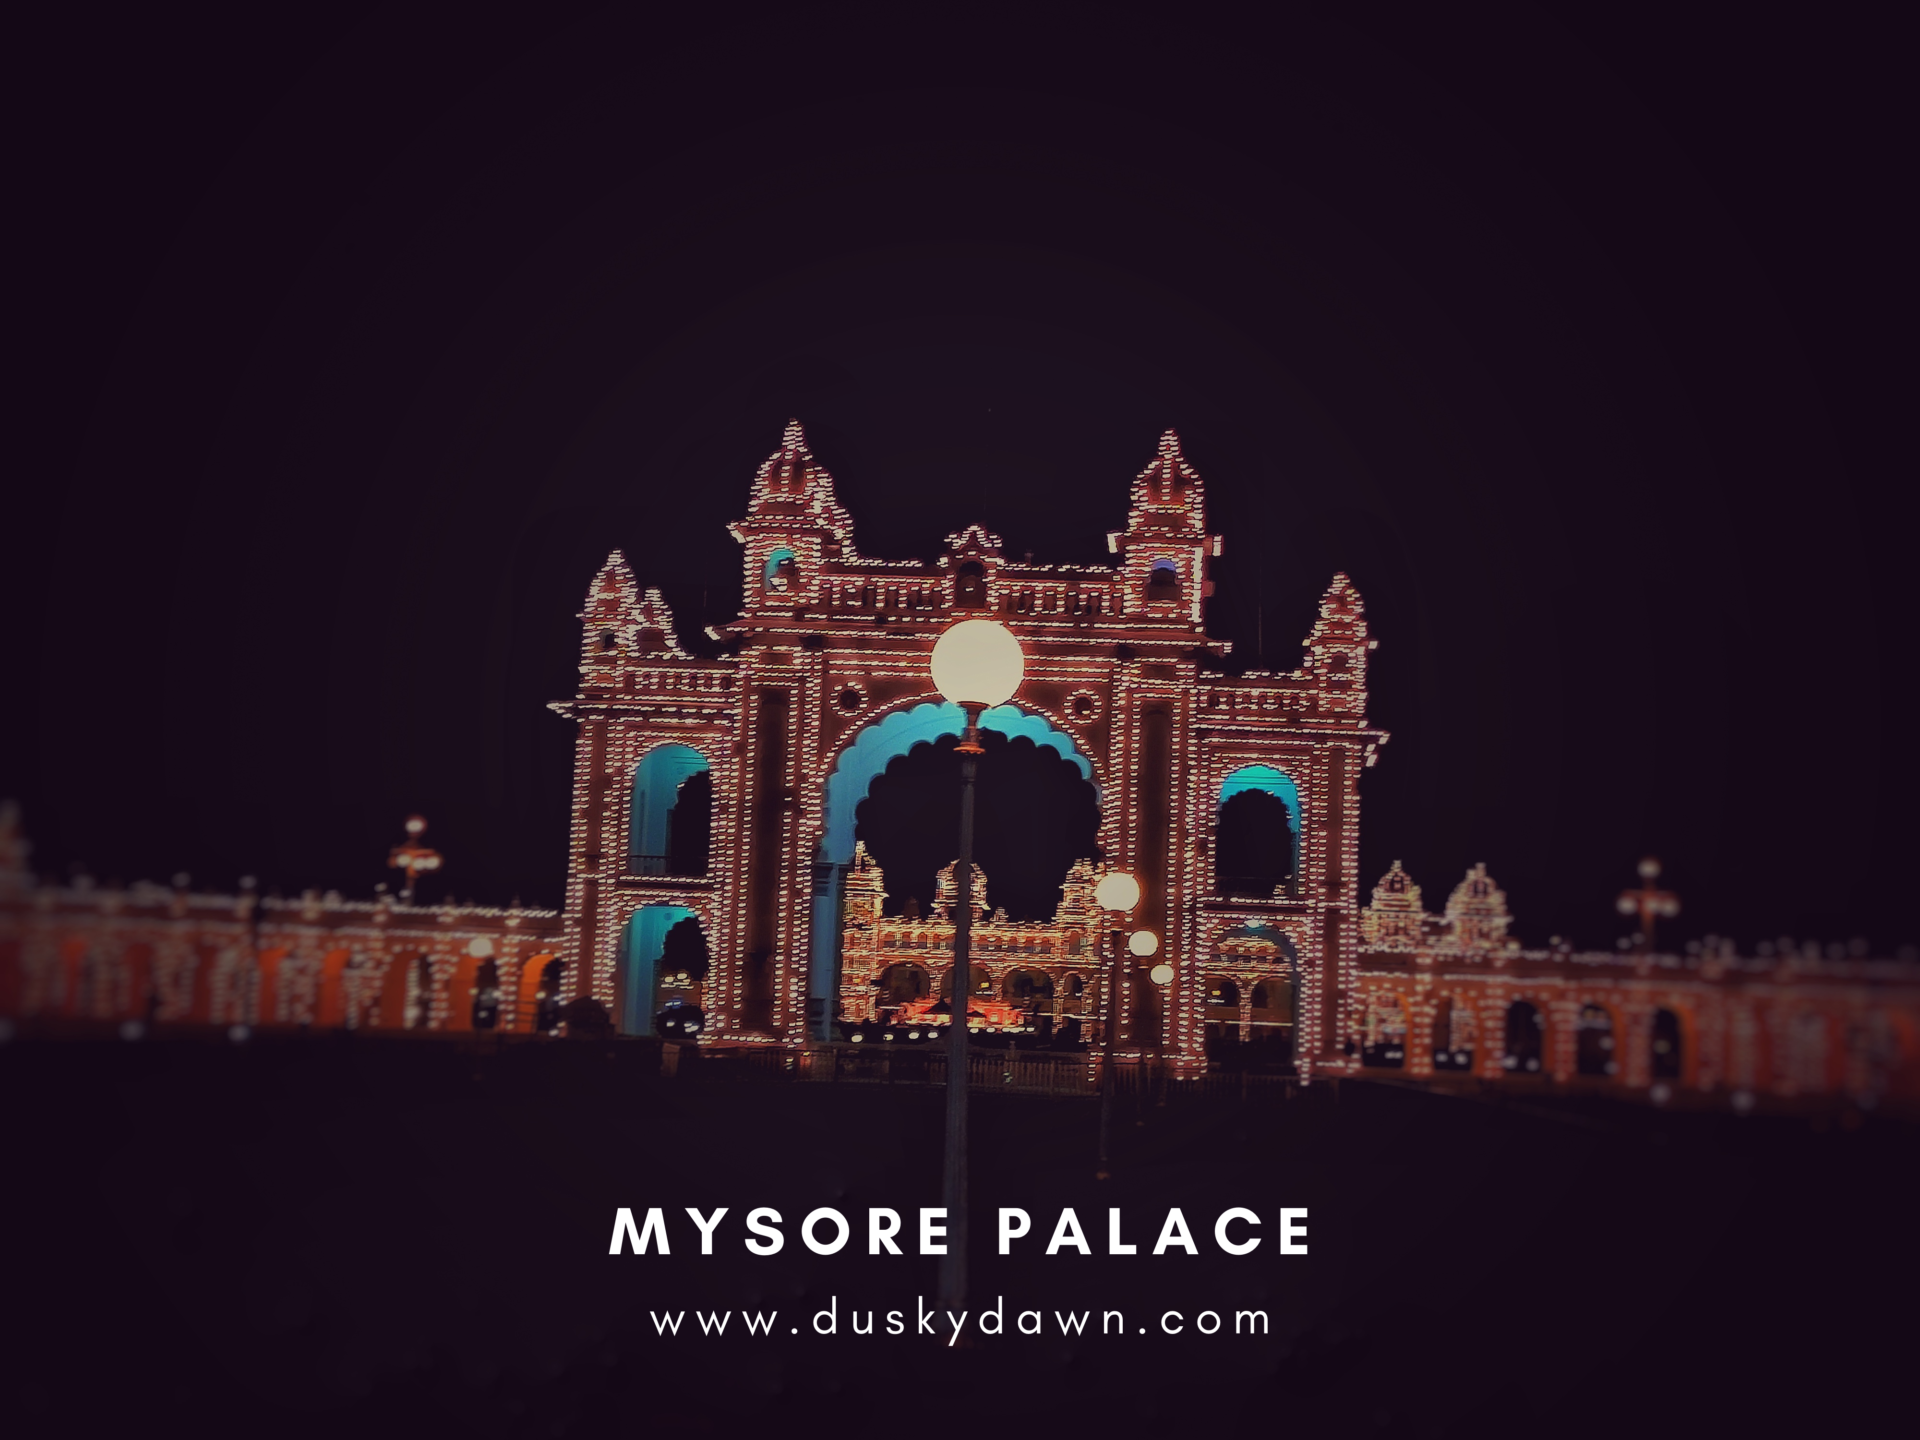 Lighting at Mysore Palace during Dussehra 2020 